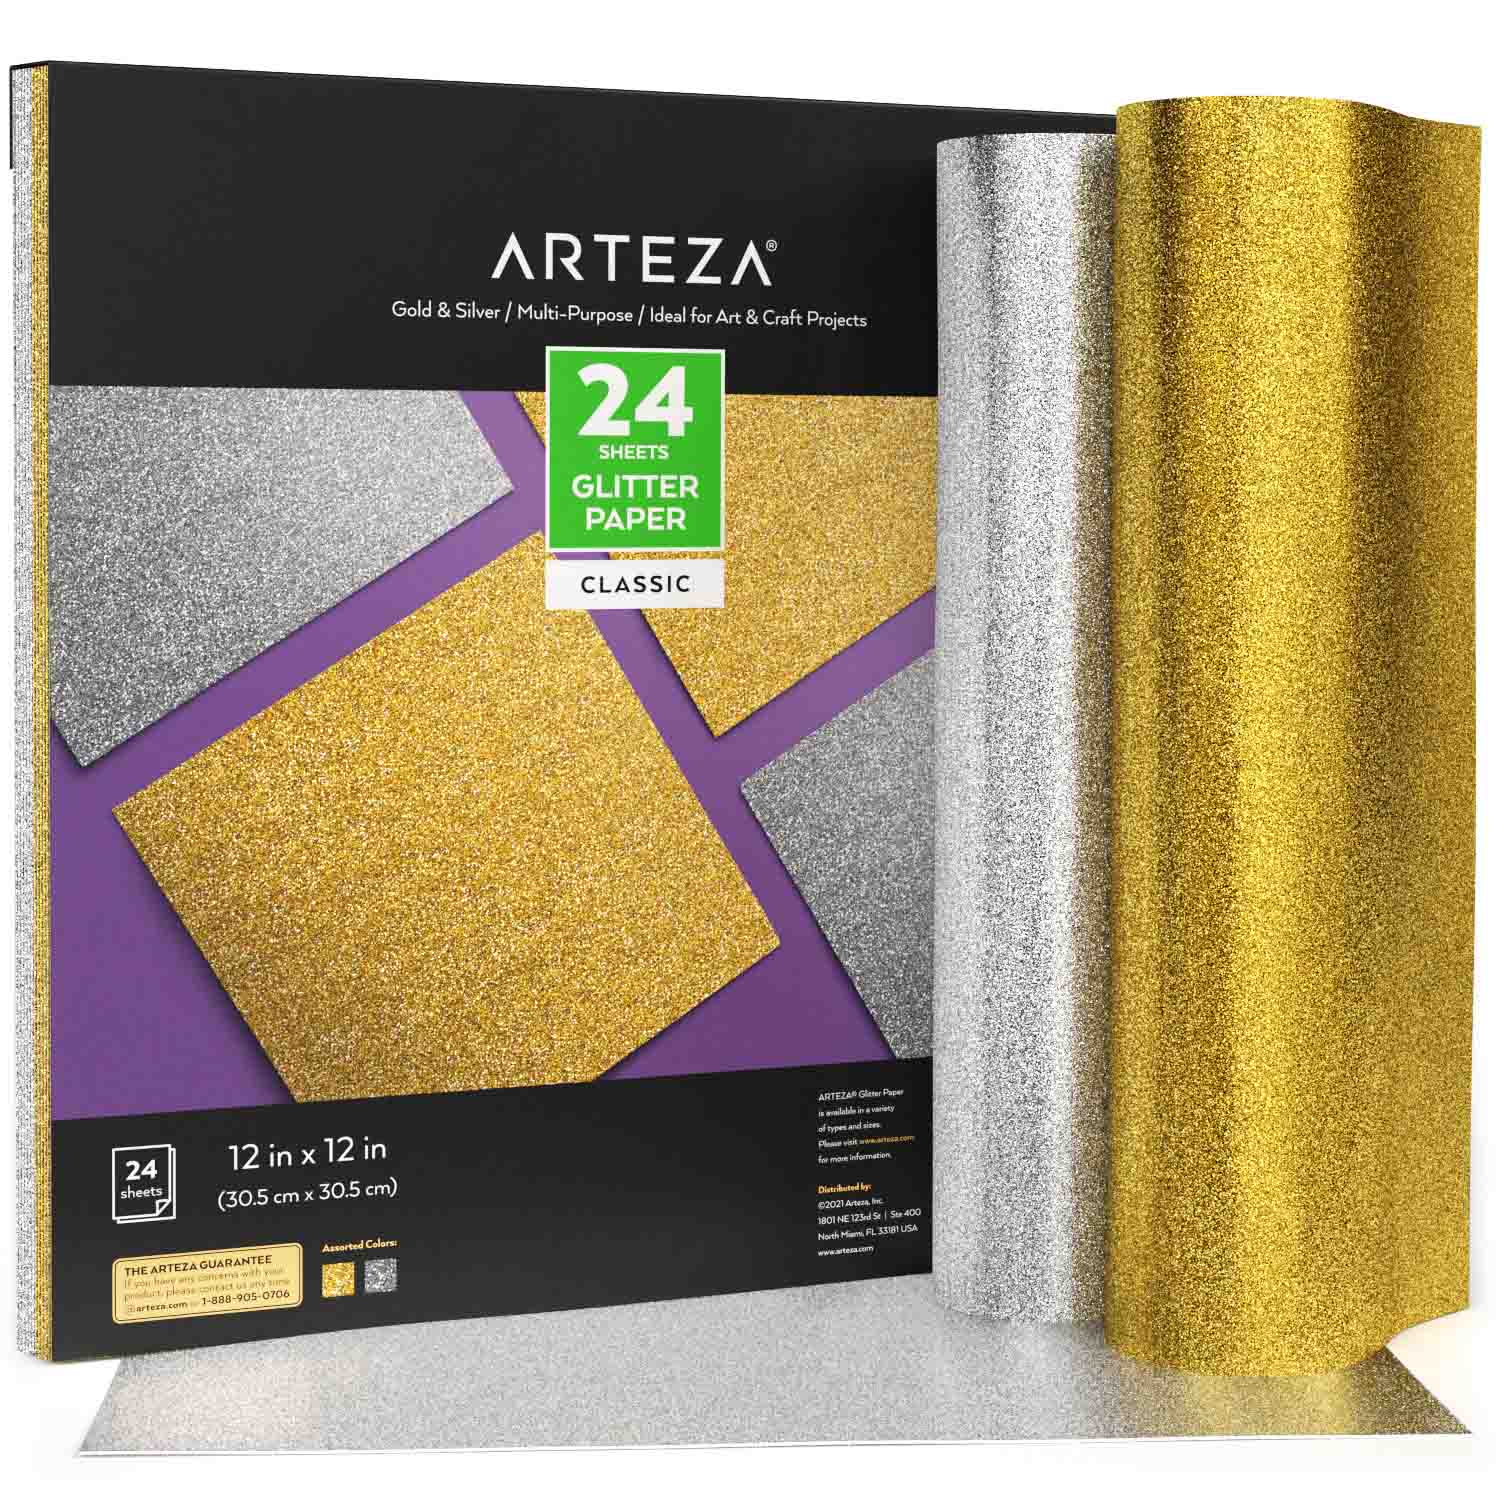 Et Cetera Papers Glitter Paper 12X12 - 10 PACK - Pale Yellow